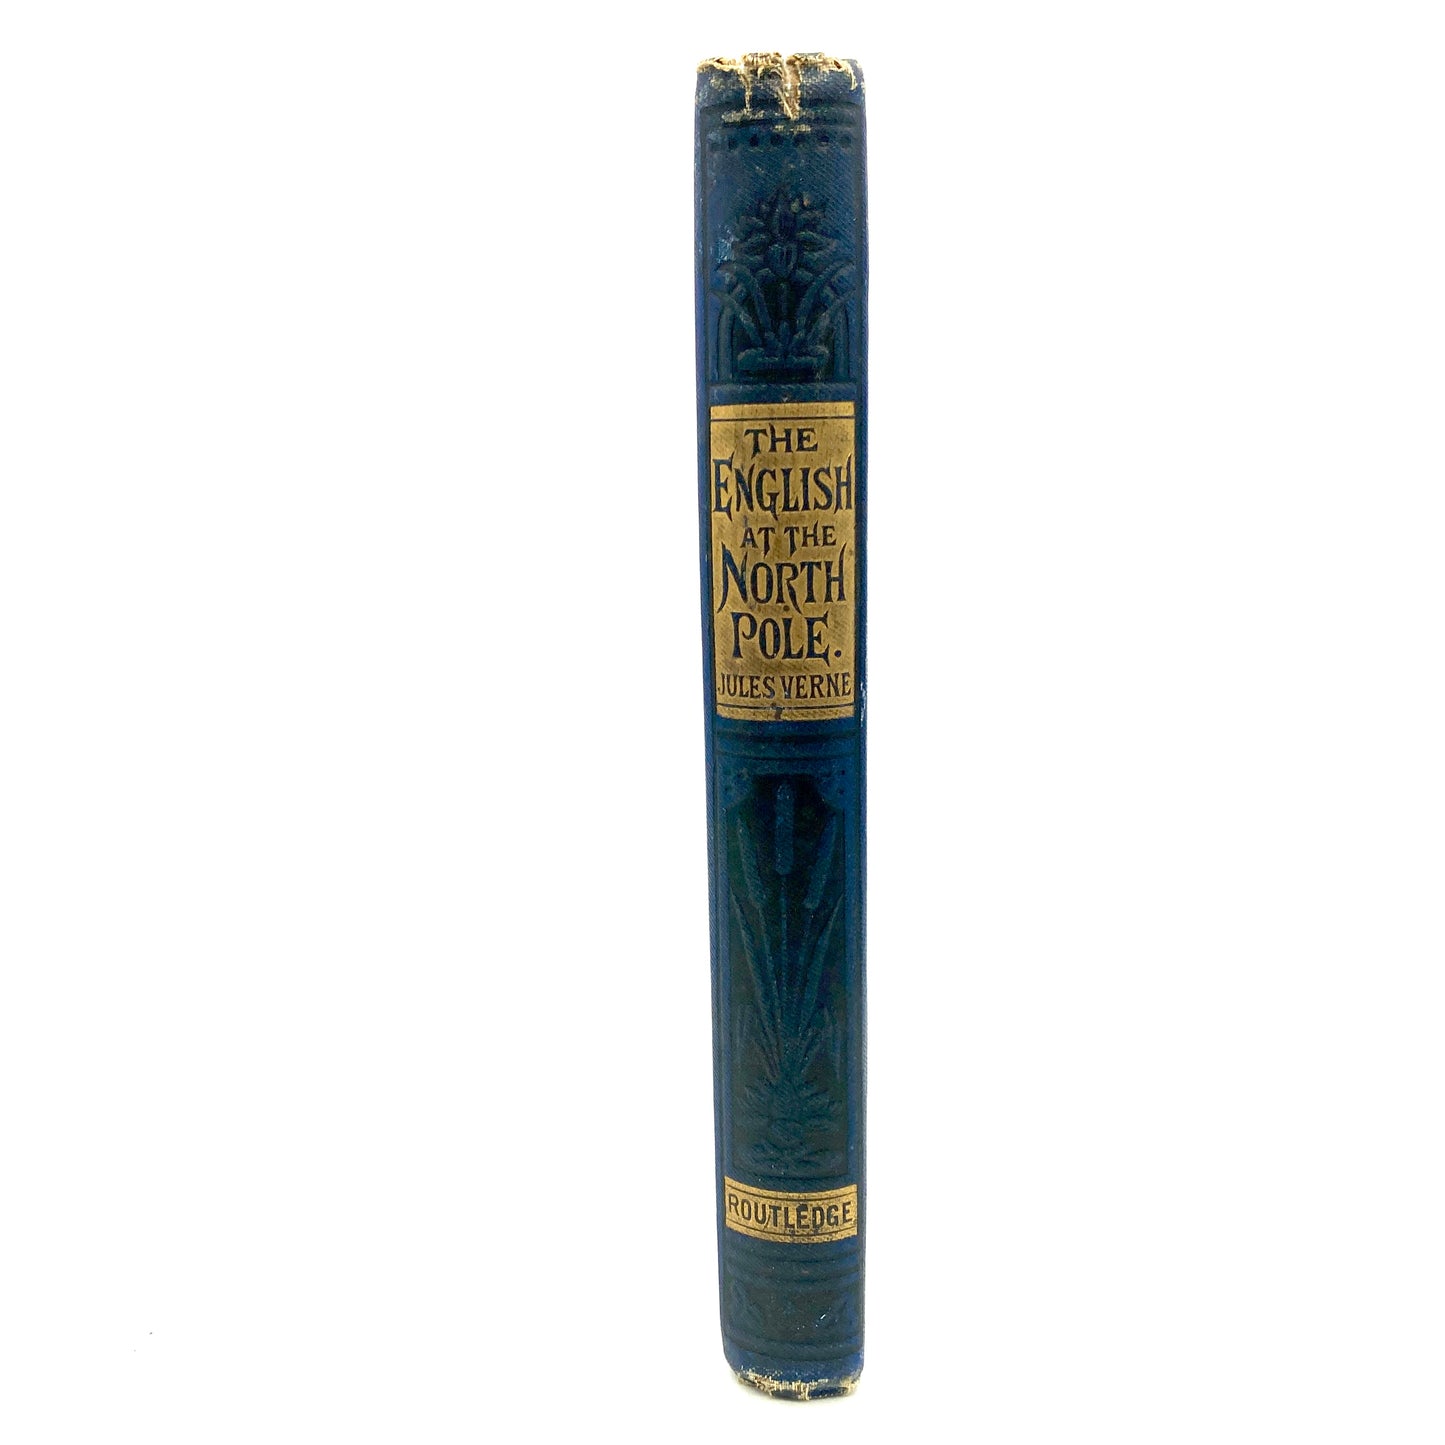 VERNE, Jules "The English at the North Pole" [George Routledge, 1876] 2nd Edition - Buzz Bookstore